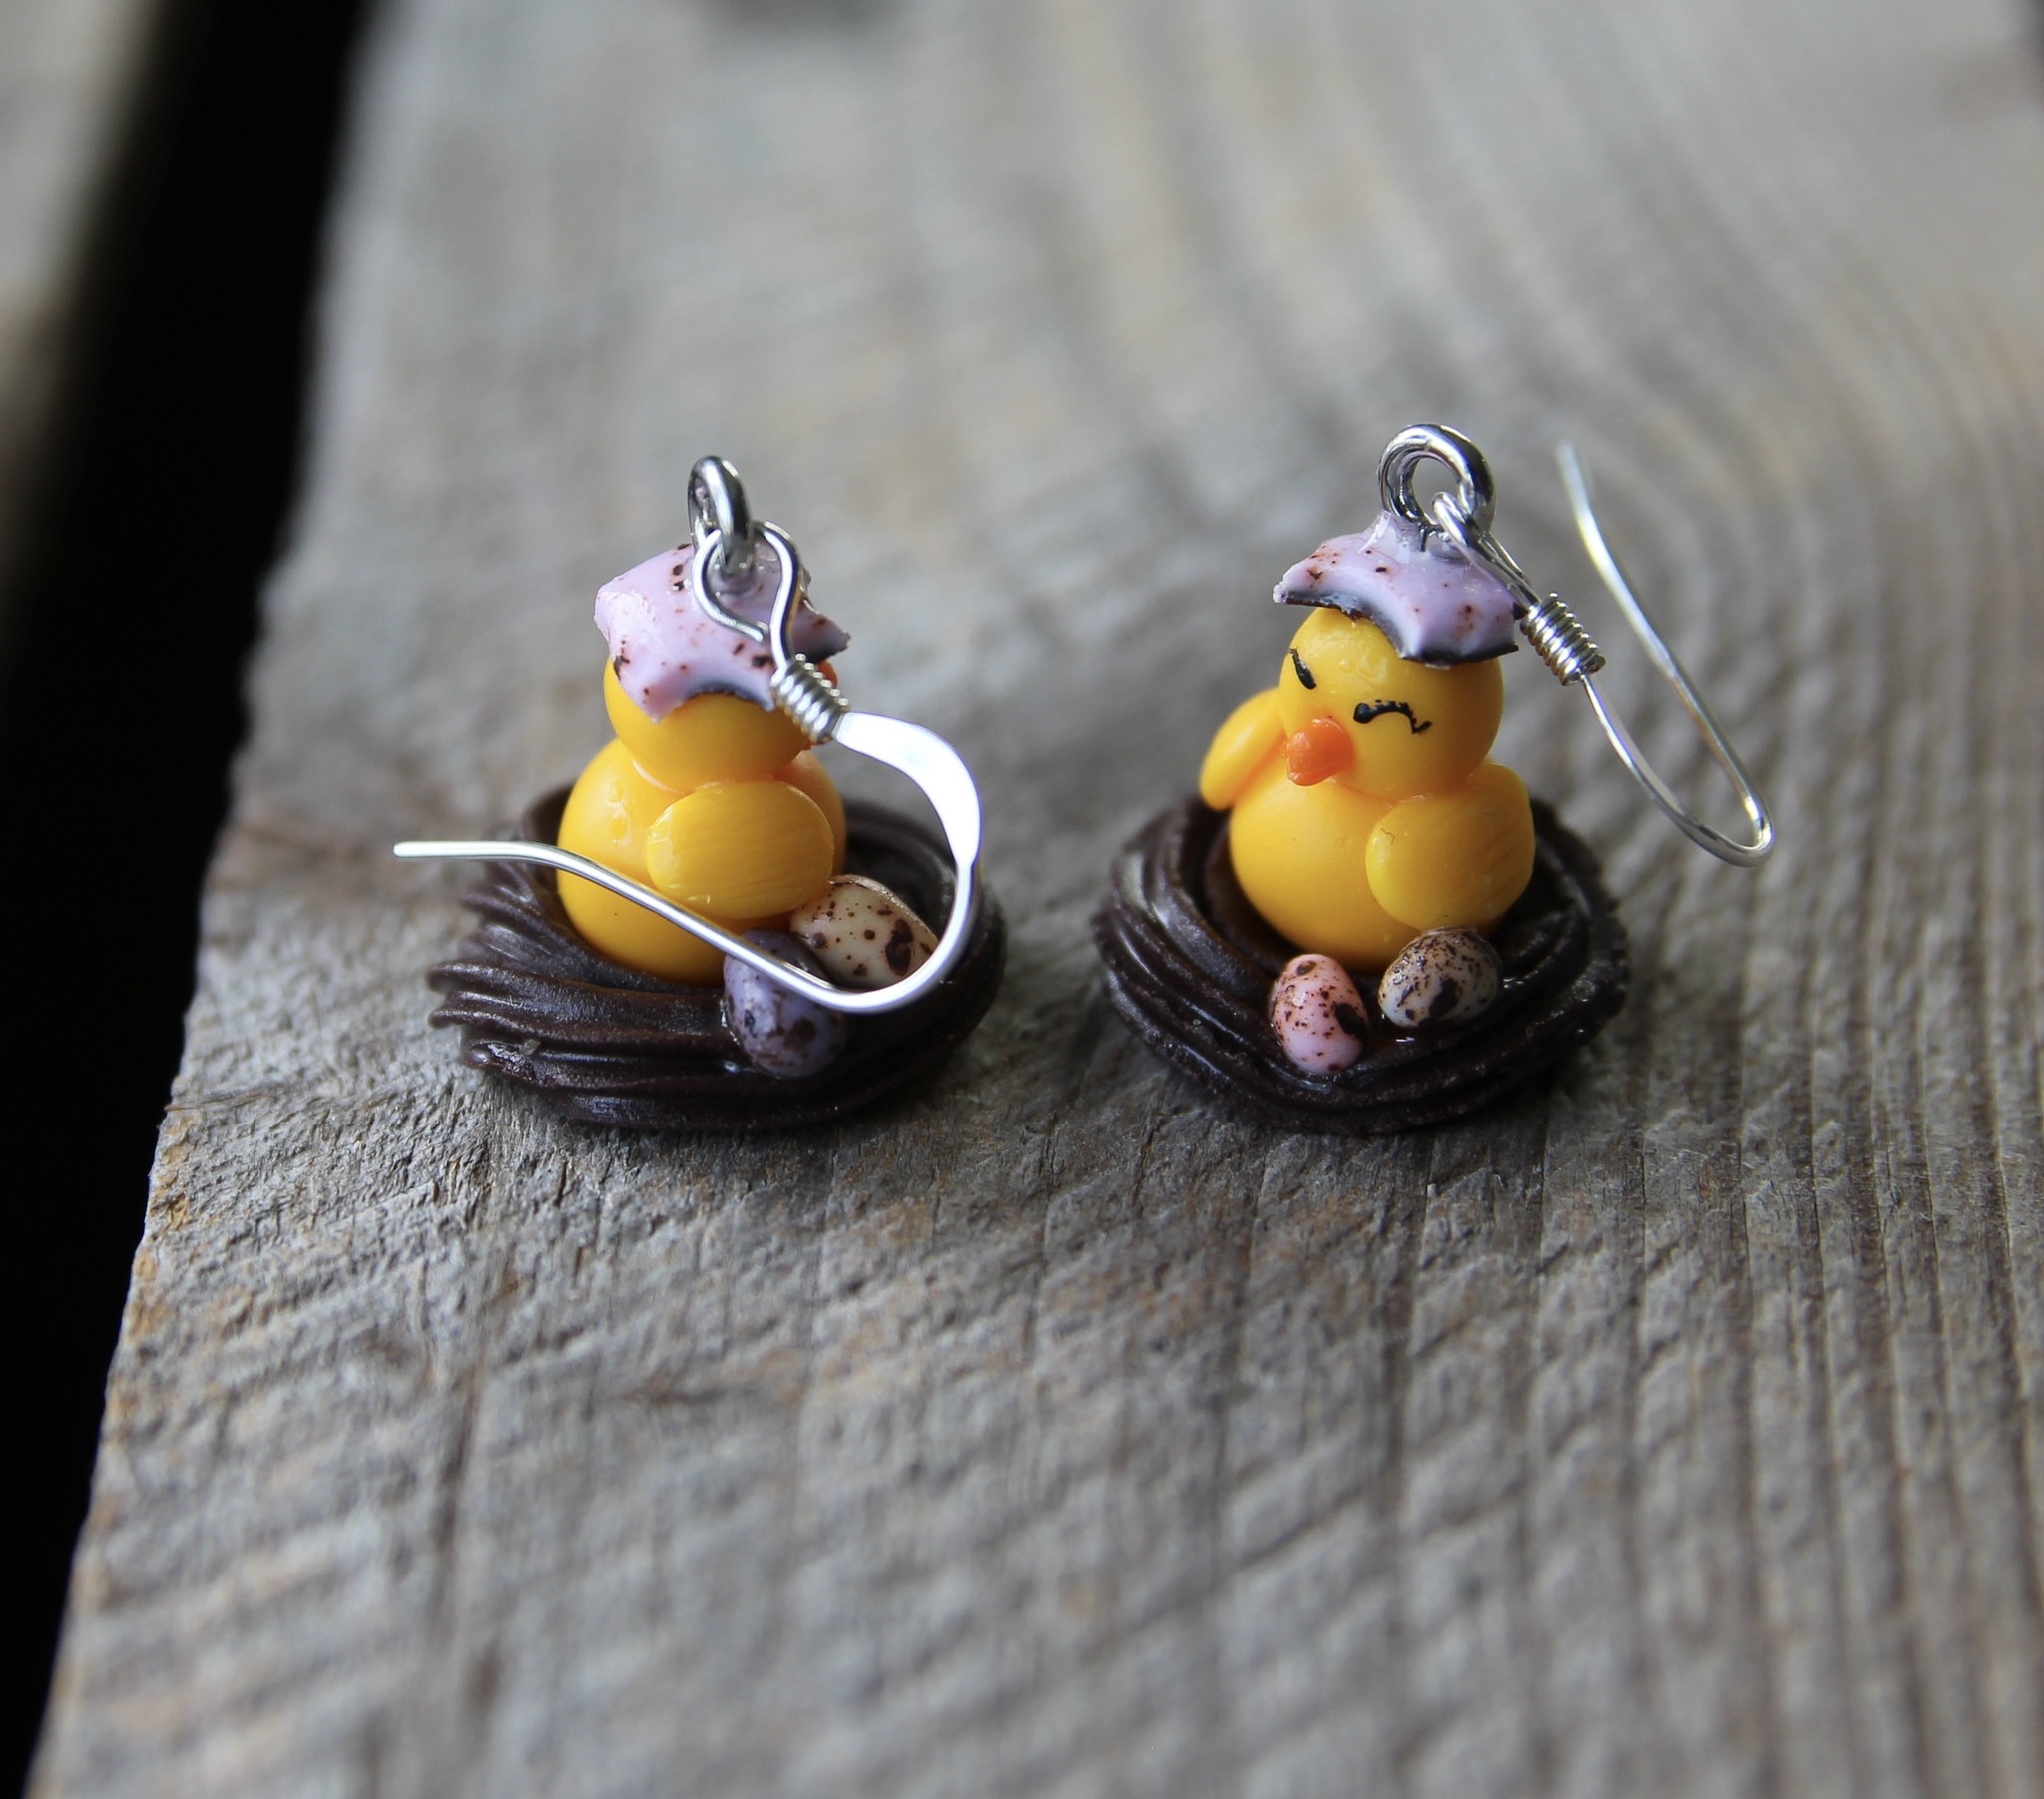 Earrings, chicks in a chocolate bird's nest with small chocolate eggs